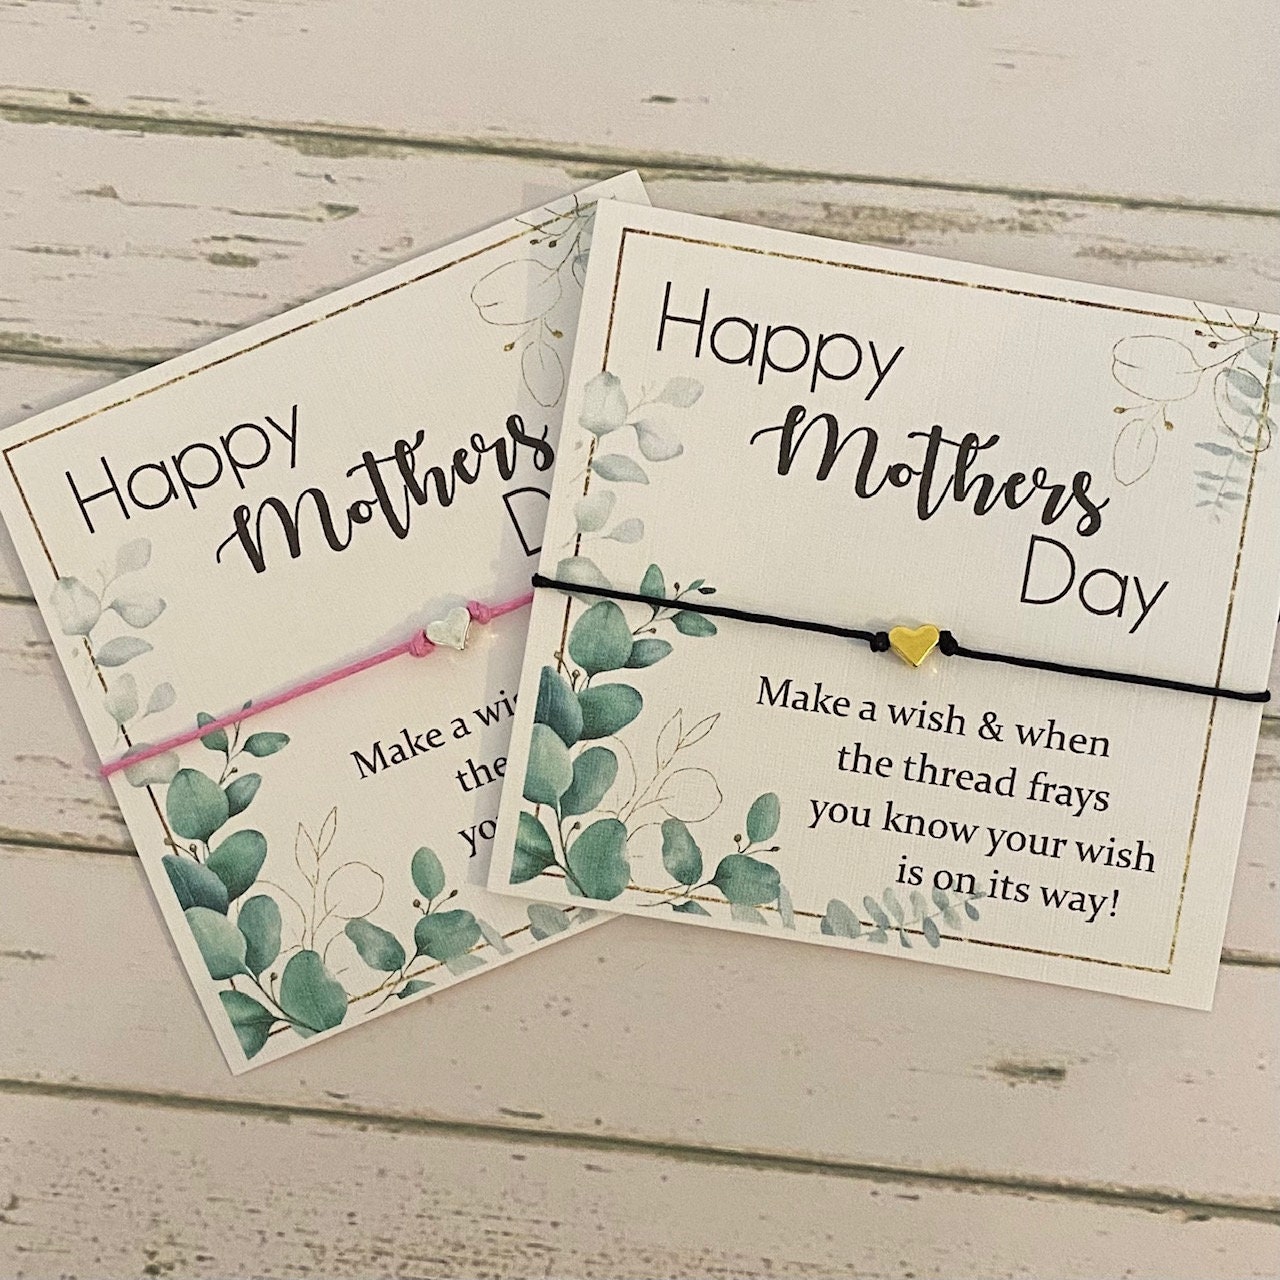 Cheap Mothers Day Gifts Under 20 Dollars, Bulk Mothers Day Church Gifts,  Gift Ideasfor Mothers Day, Mothere Day Gifts, Mothers Dsy Gifts, 